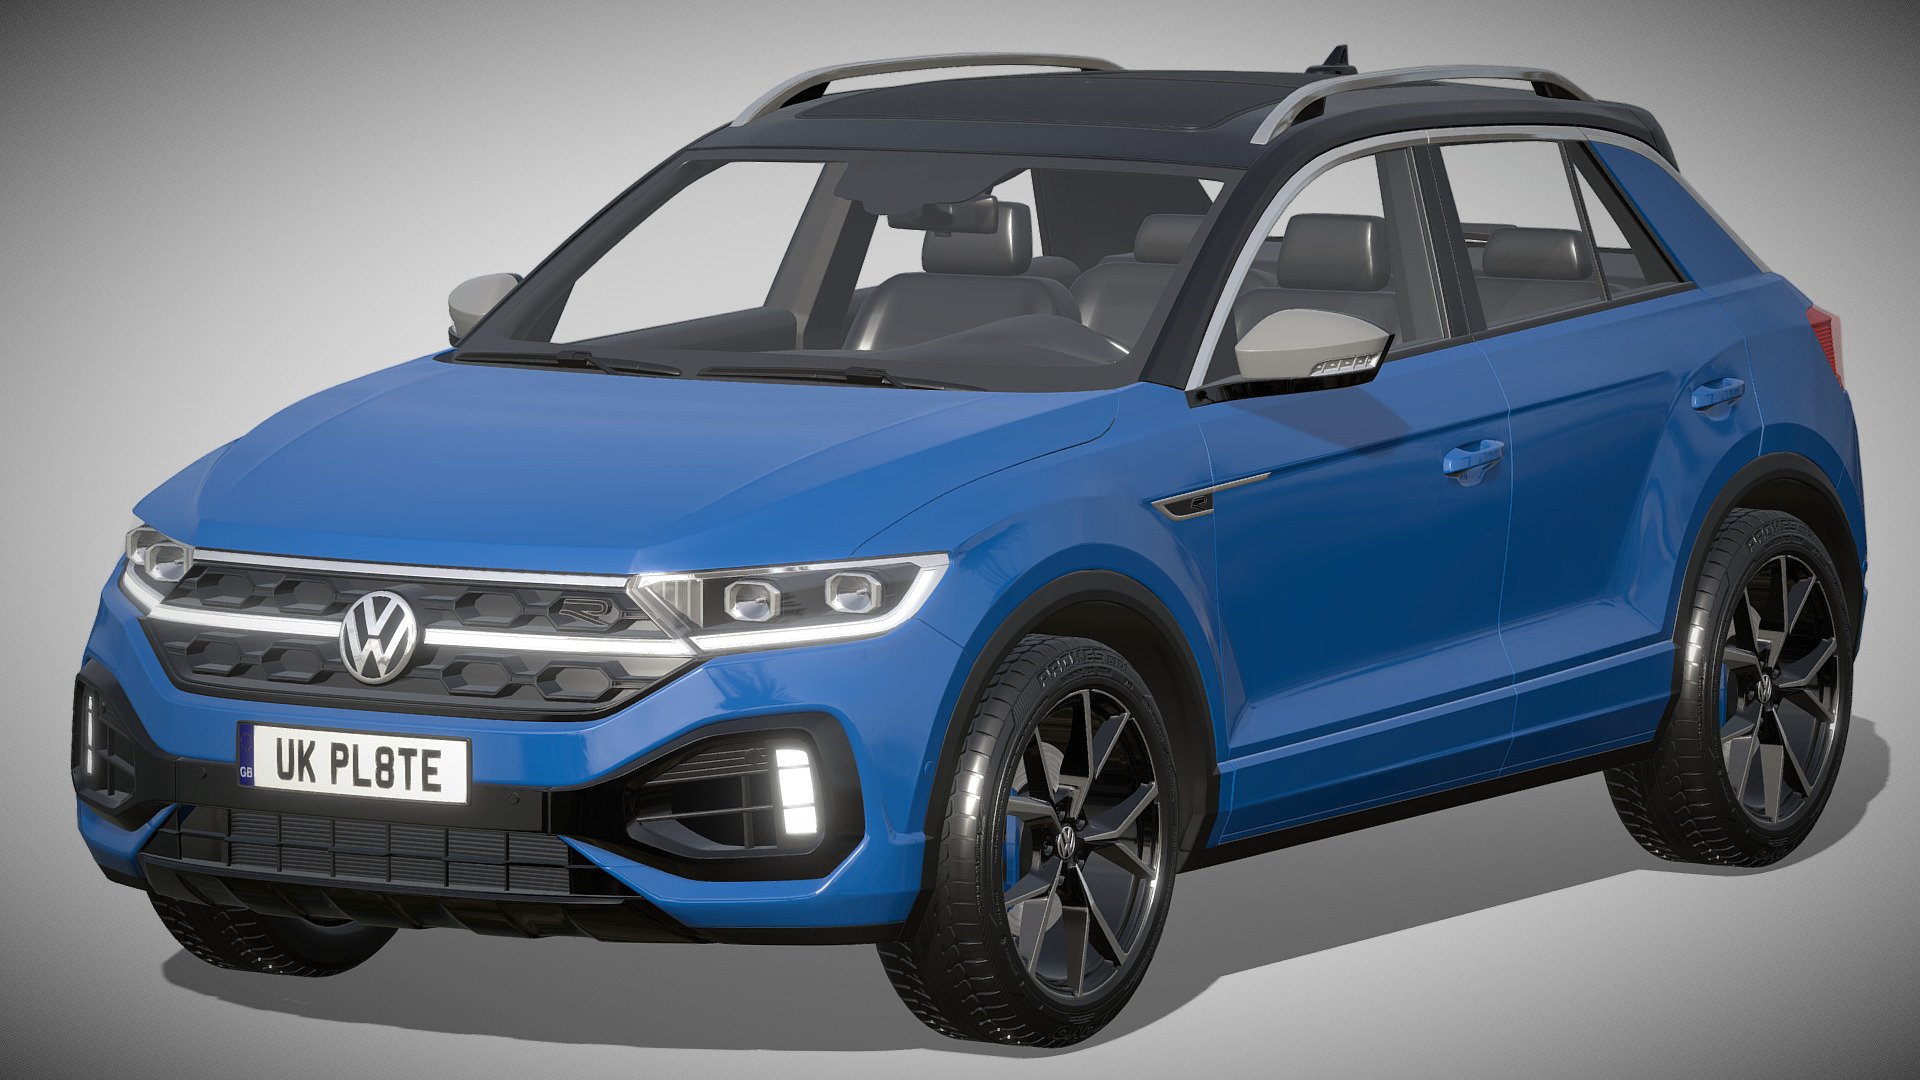 Volkswagen T-Roc R 2022

https://www.volkswagen.de/de/modelle/t-roc-r.html

Clean geometry Light weight model, yet completely detailed for HI-Res renders. Use for movies, Advertisements or games

Corona render and materials

All textures include in *.rar files

Lighting setup is not included in the file! - Volkswagen T-Roc R 2022 - Buy Royalty Free 3D model by zifir3d 3d model